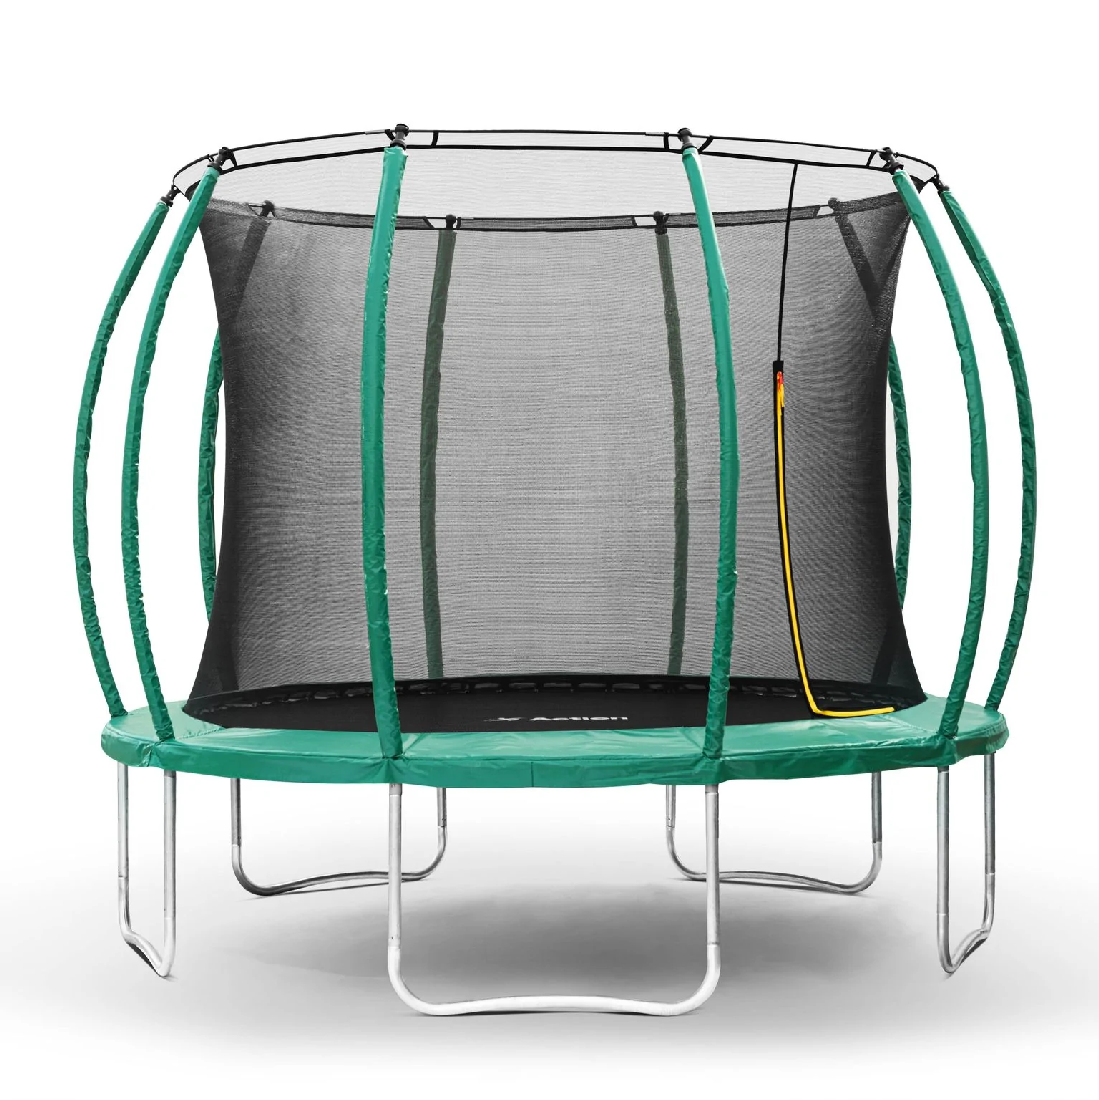 ACTION ULTIMATE TRAMPOLINE - 12FT